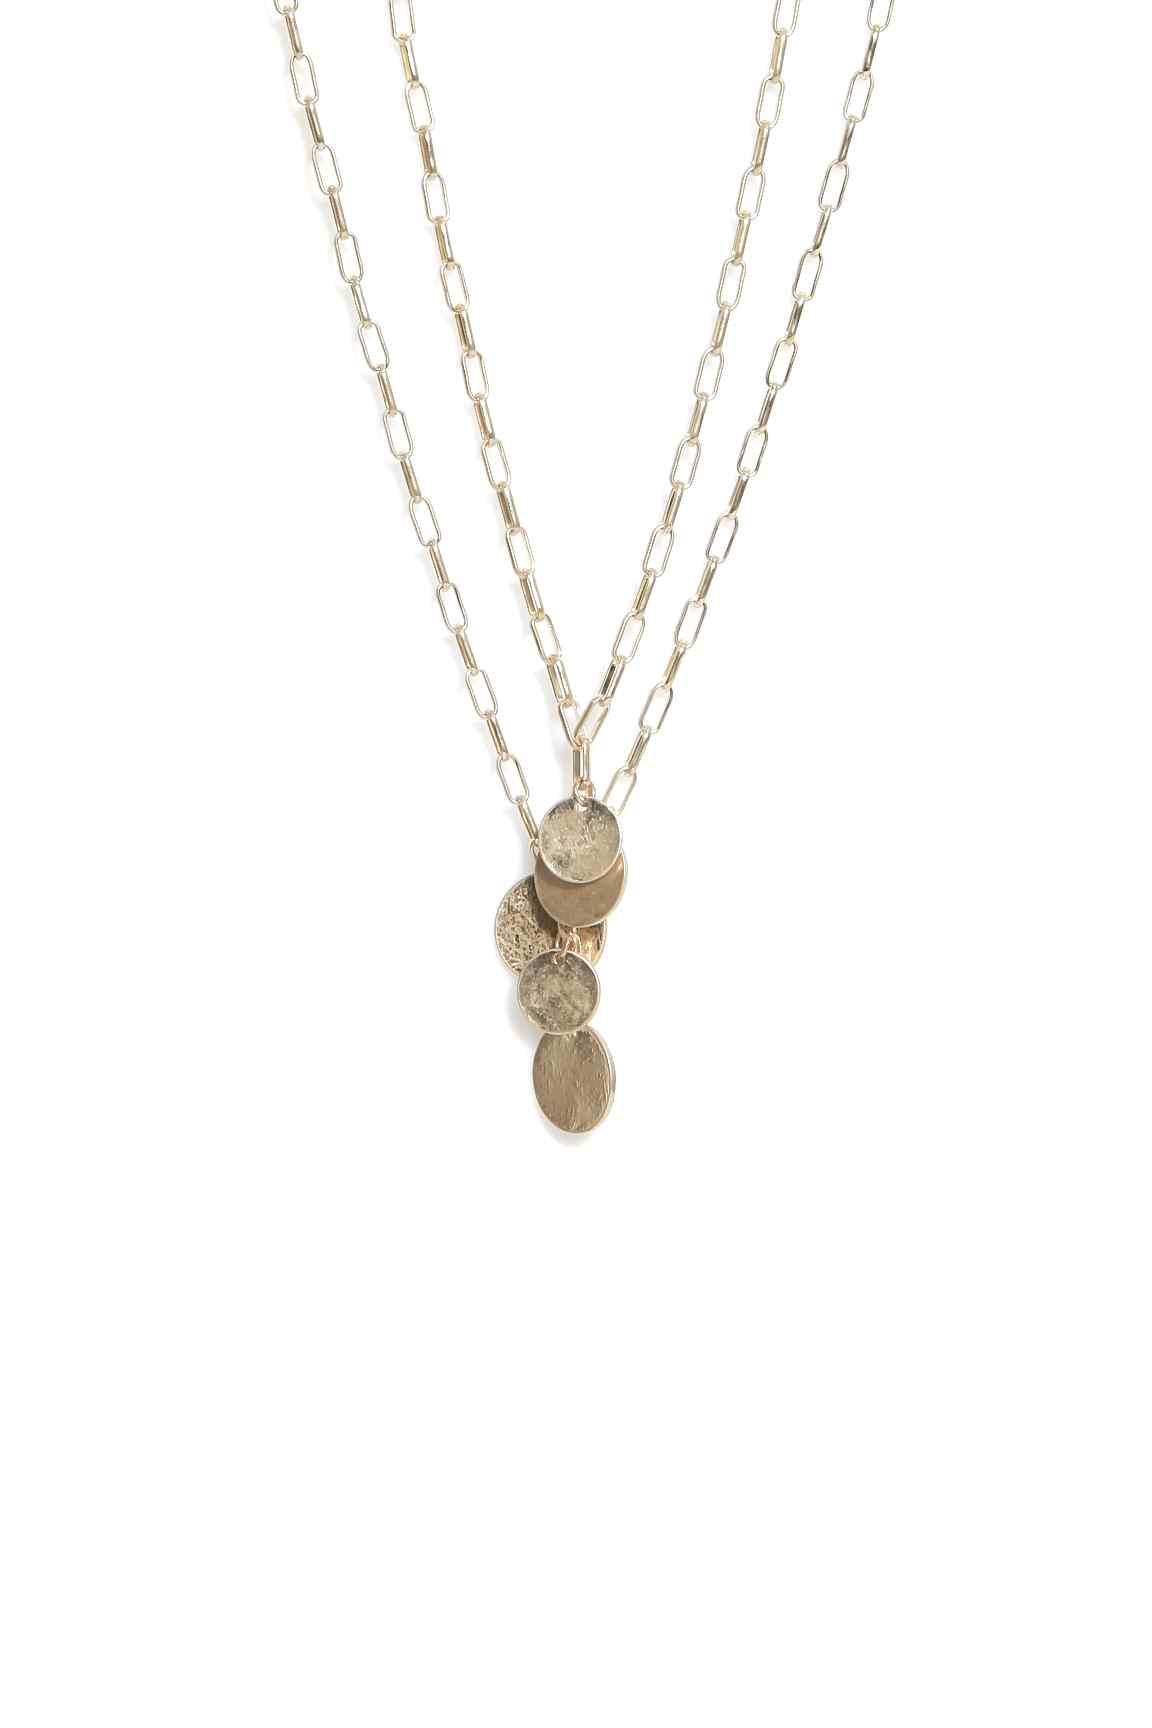 Gold Layer Necklace with Coin Pendants - The Tulip Tree Chiddingstone